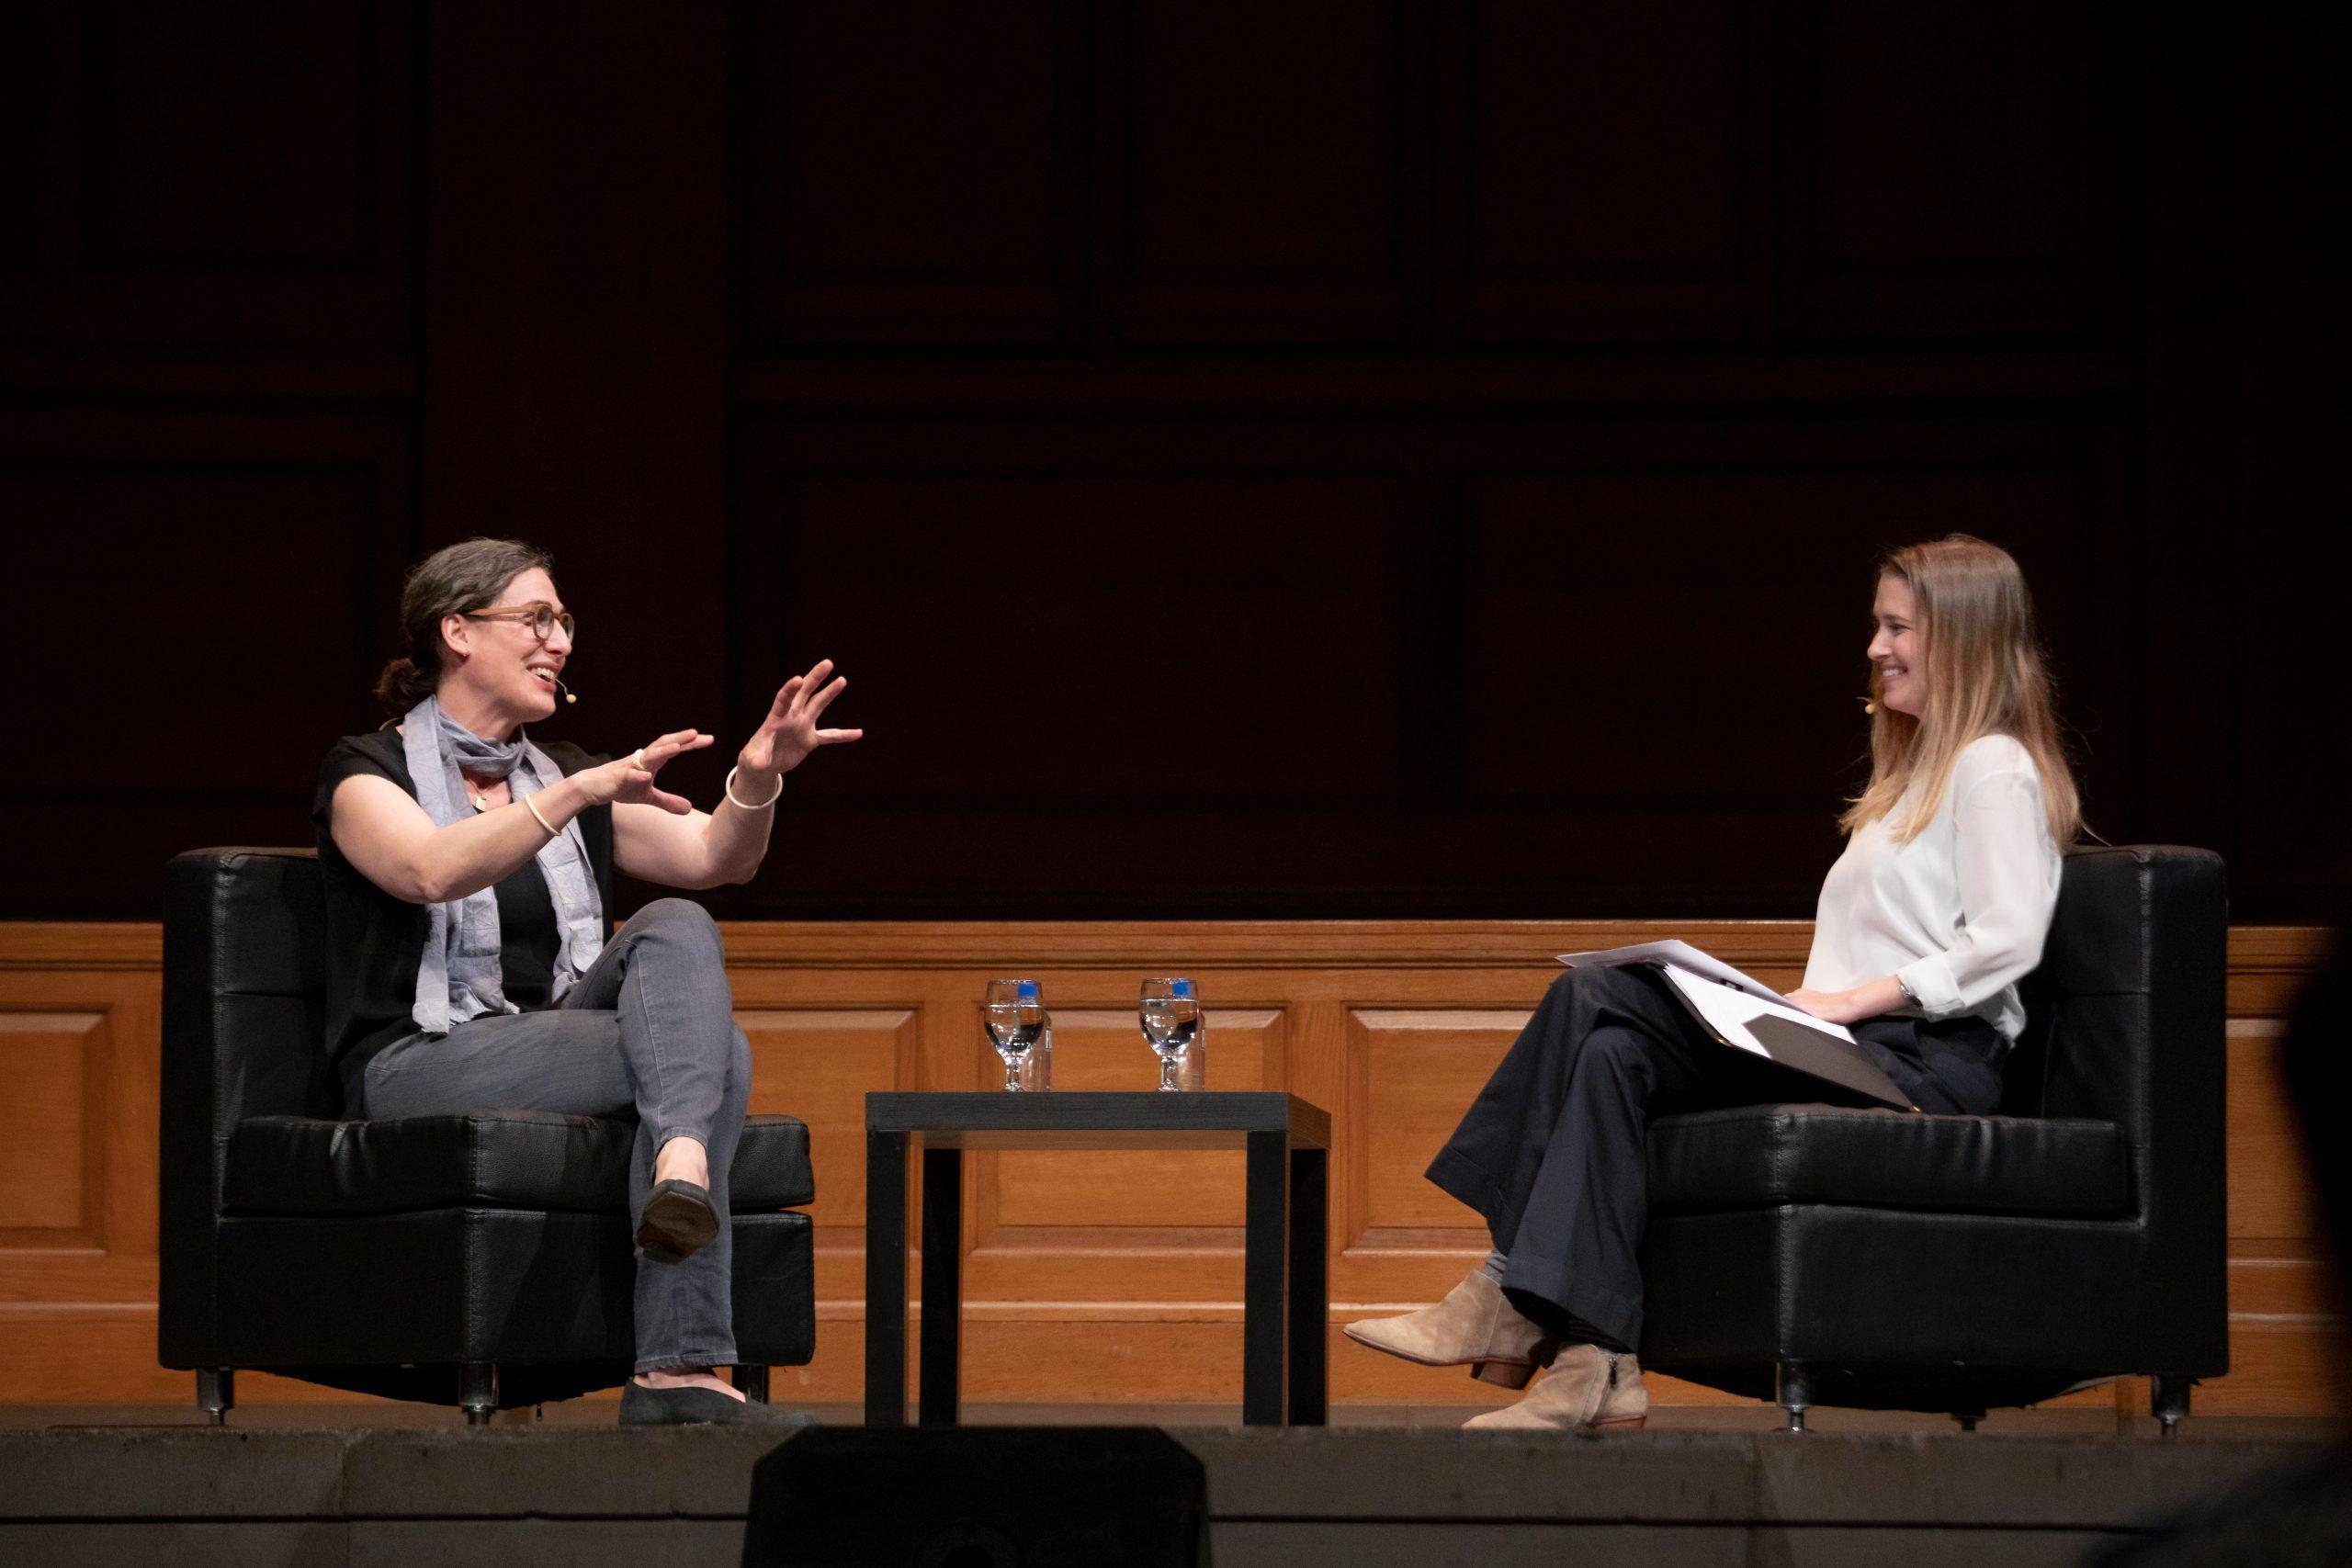 Journalist Sarah Koenig, the producer of the podcast Serial and a former producer of This American Life, speaks at Wake Forest University on Monday, November 4, 2019. WFDD assistant news director Bethany Chafin talks with Koenig.